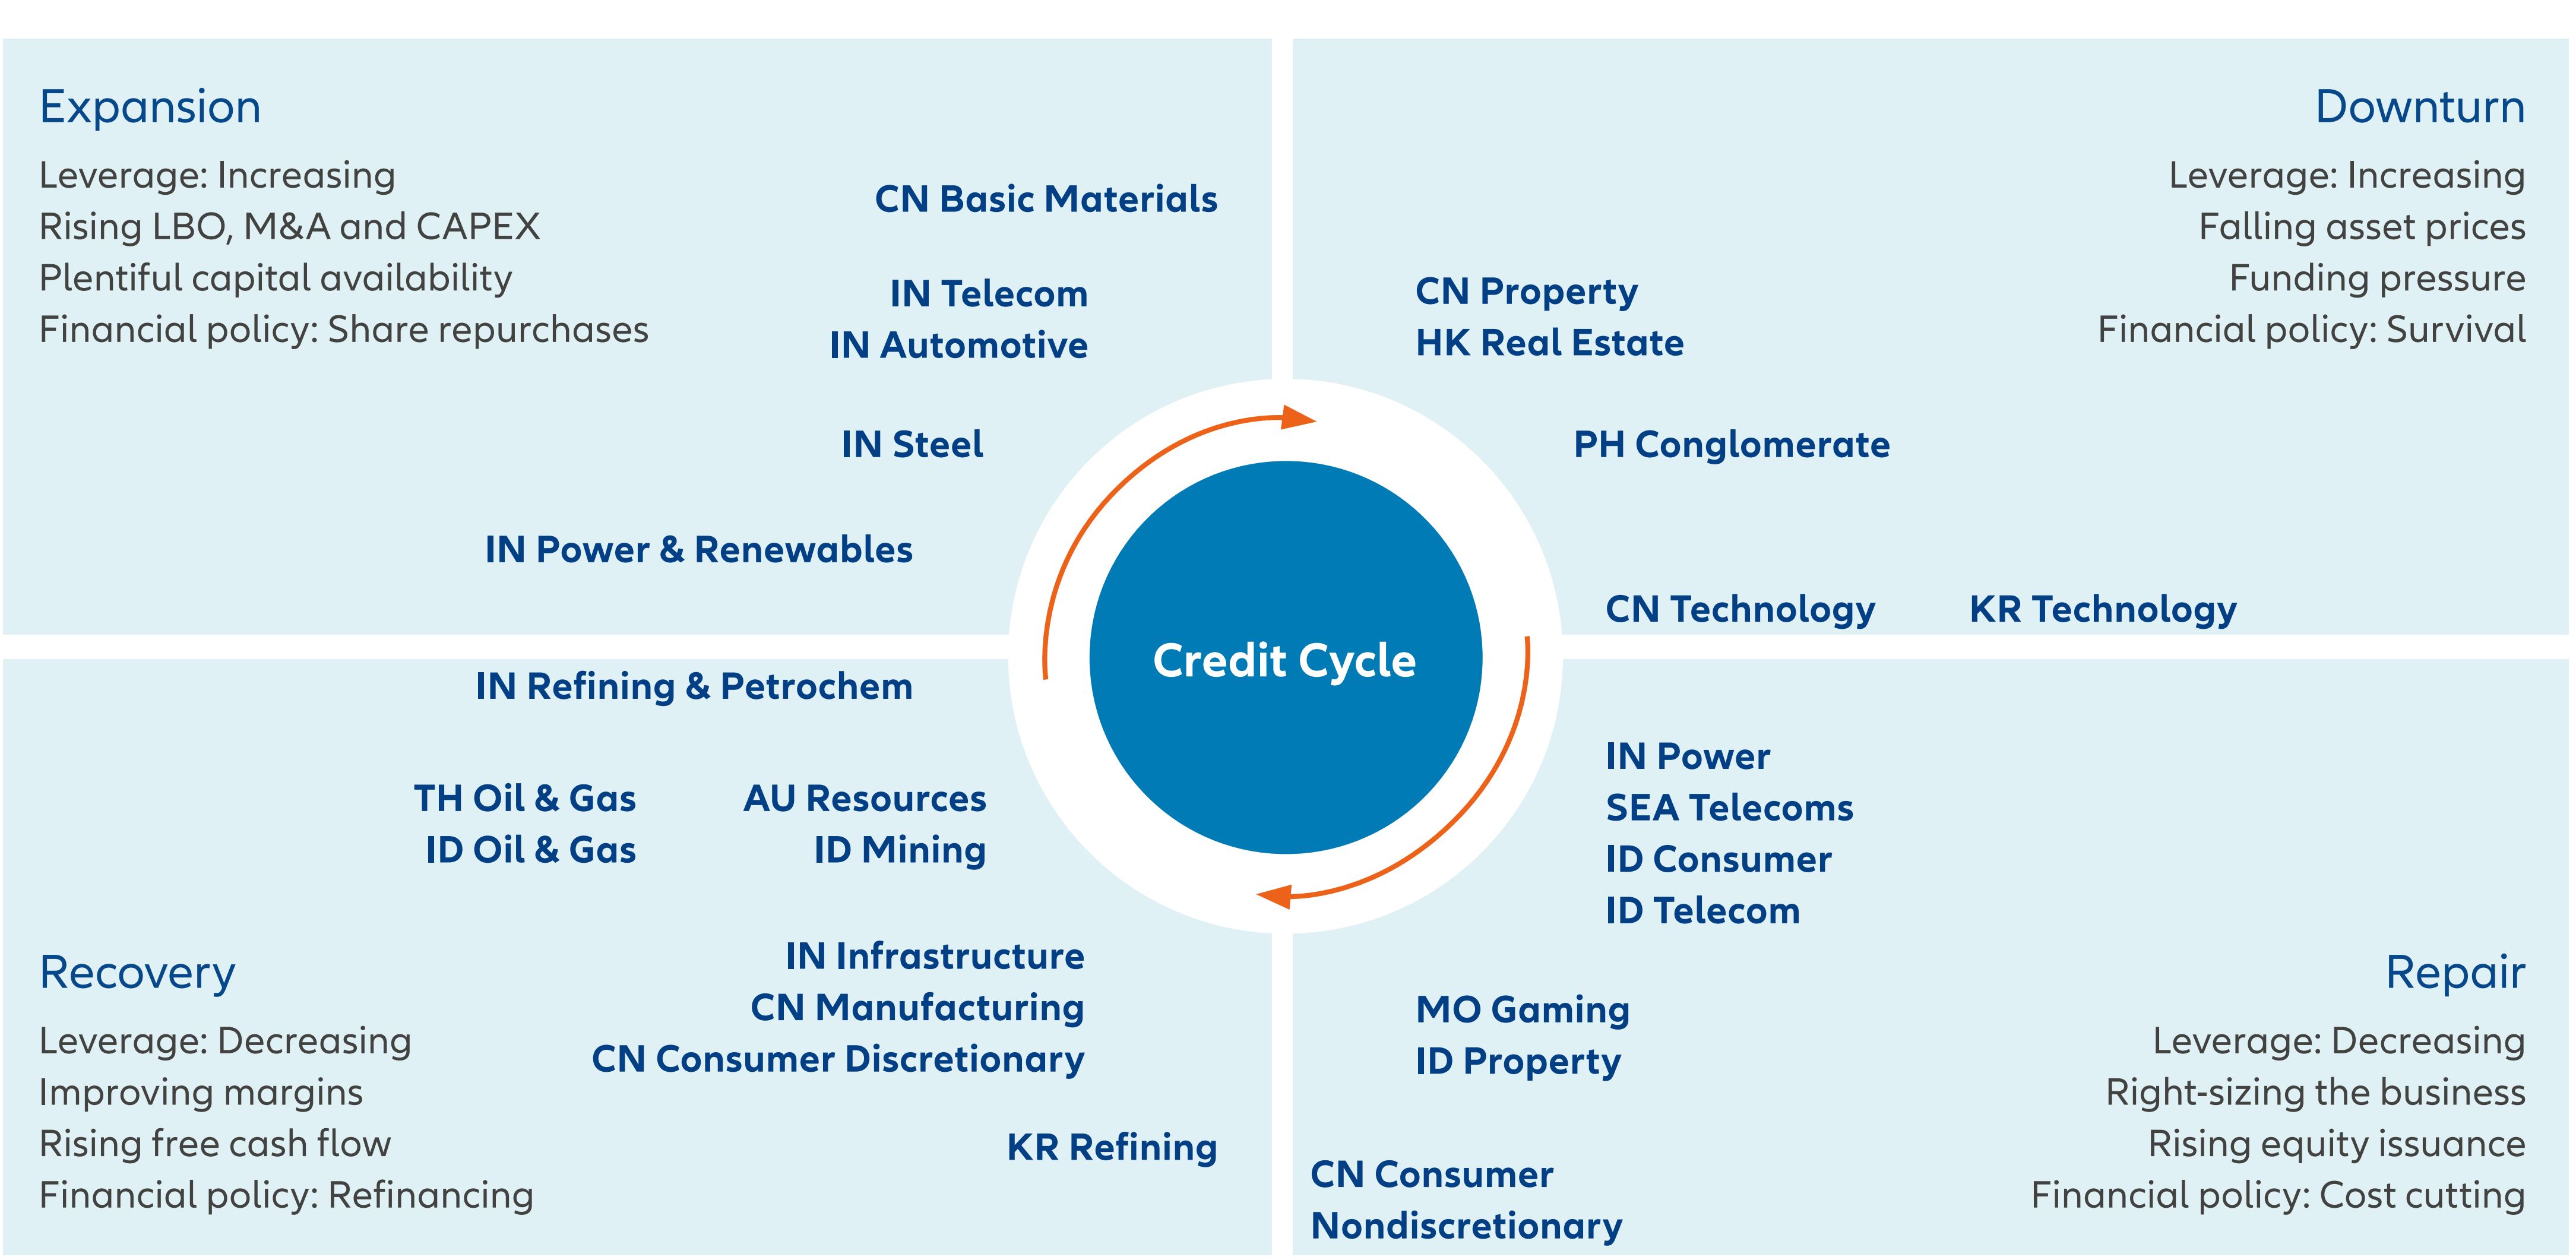 Exhibit 2: Asian corporates’ position in credit cycle